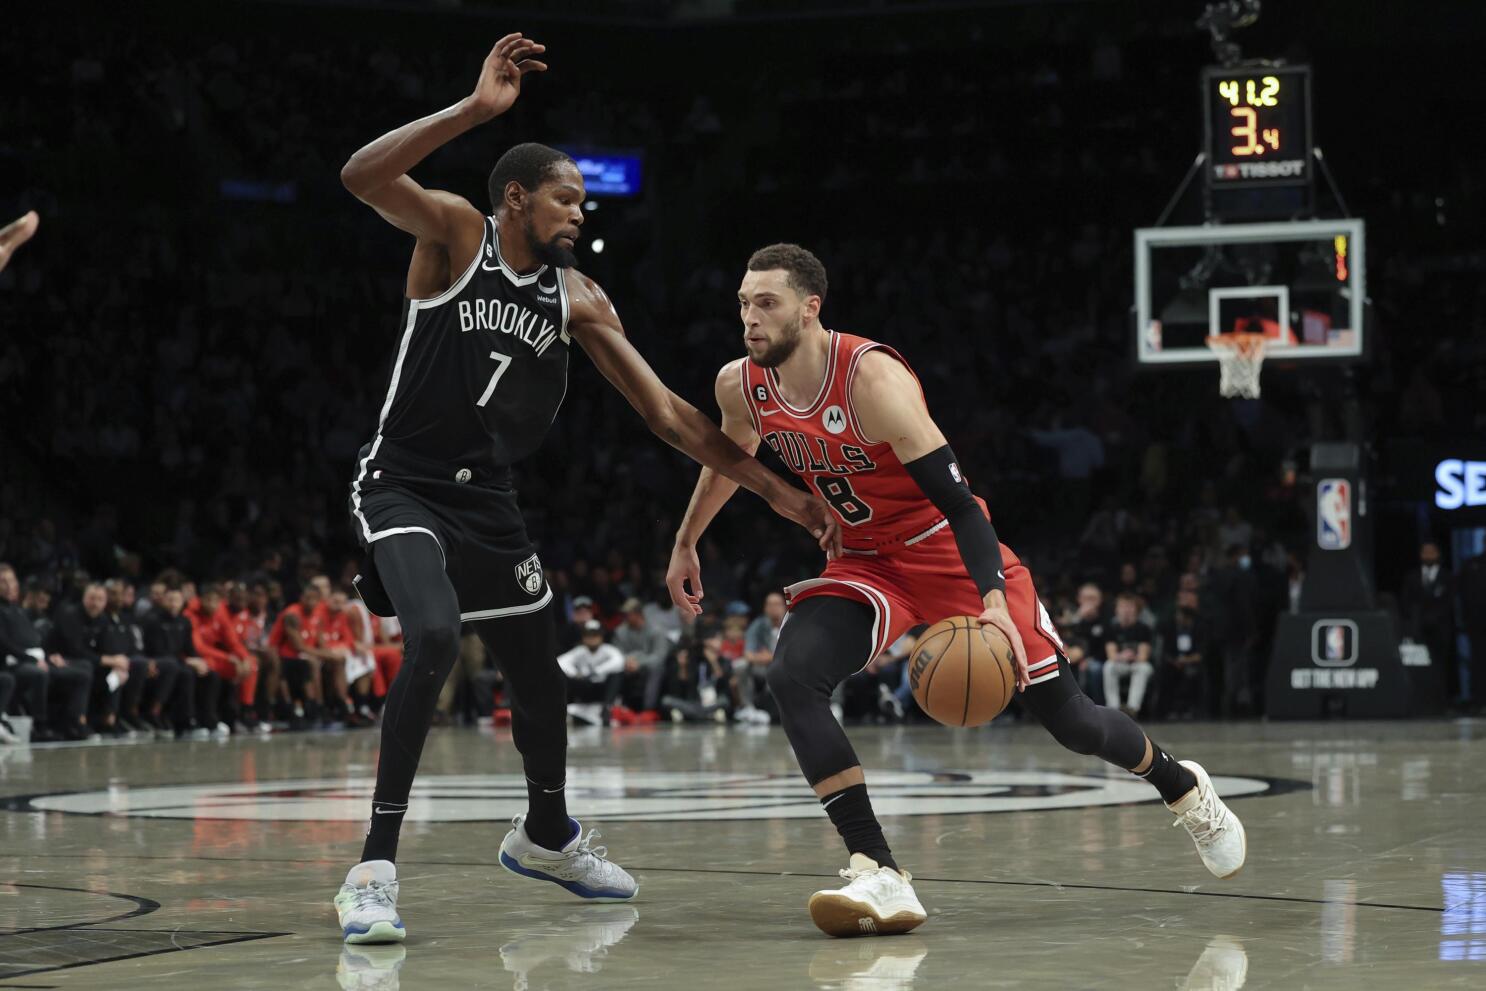 Zach LaVine and DeMar DeRozan star as Chicago Bulls beat Brooklyn Nets in  matchup of Eastern Conference's top teams, NBA News